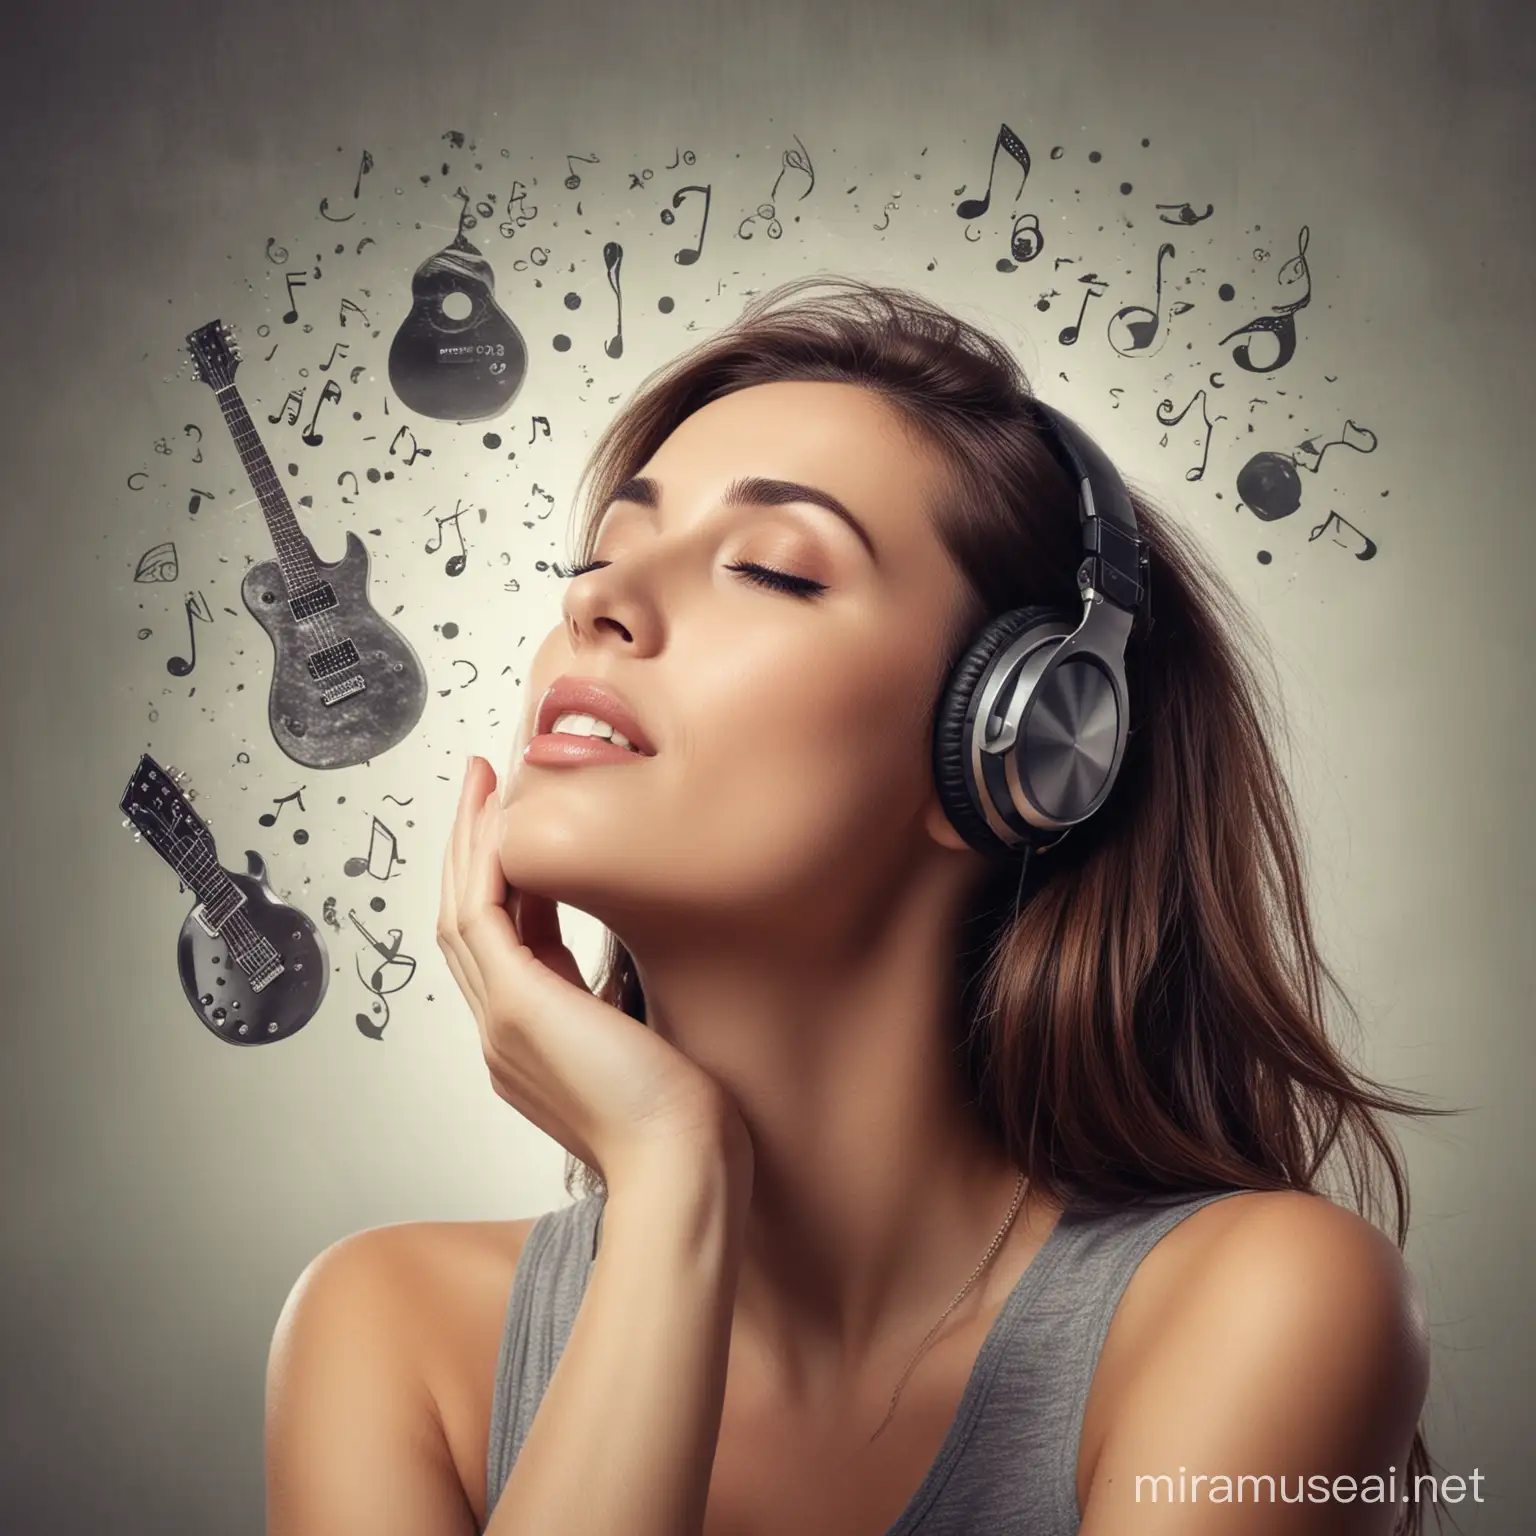 A woman daydreaming about rock music